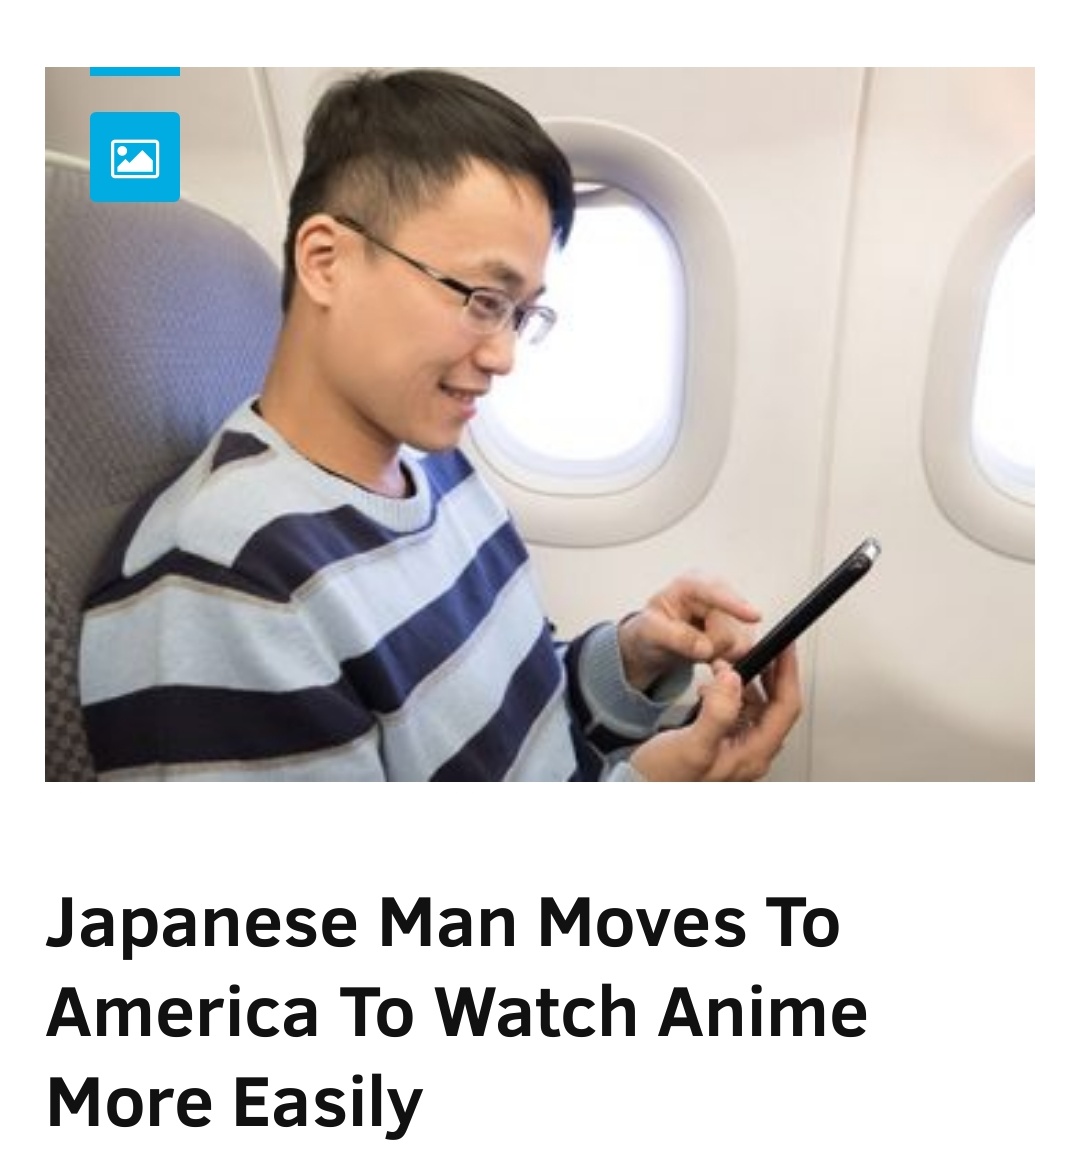 microphone - Japanese Man Moves To America To Watch Anime More Easily